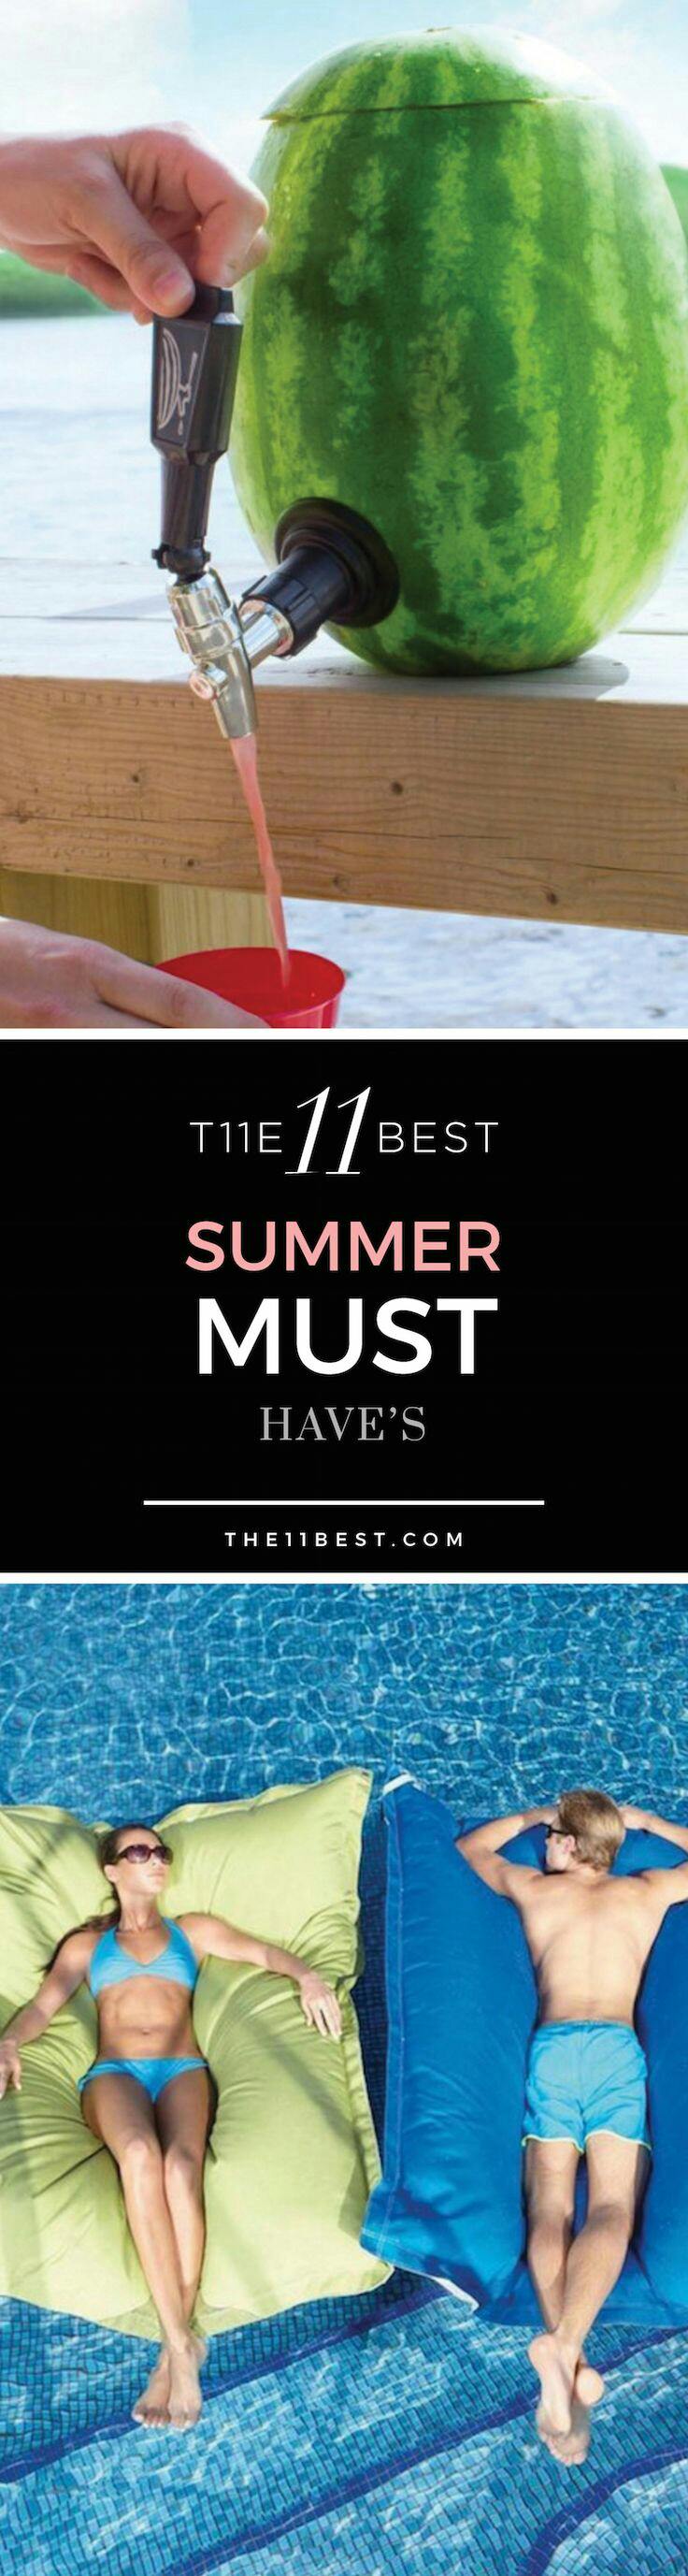 Summer, don't you love the warmth it brings? Make your summer more enjoyable by adding these 11 best summer must haves. Check out!